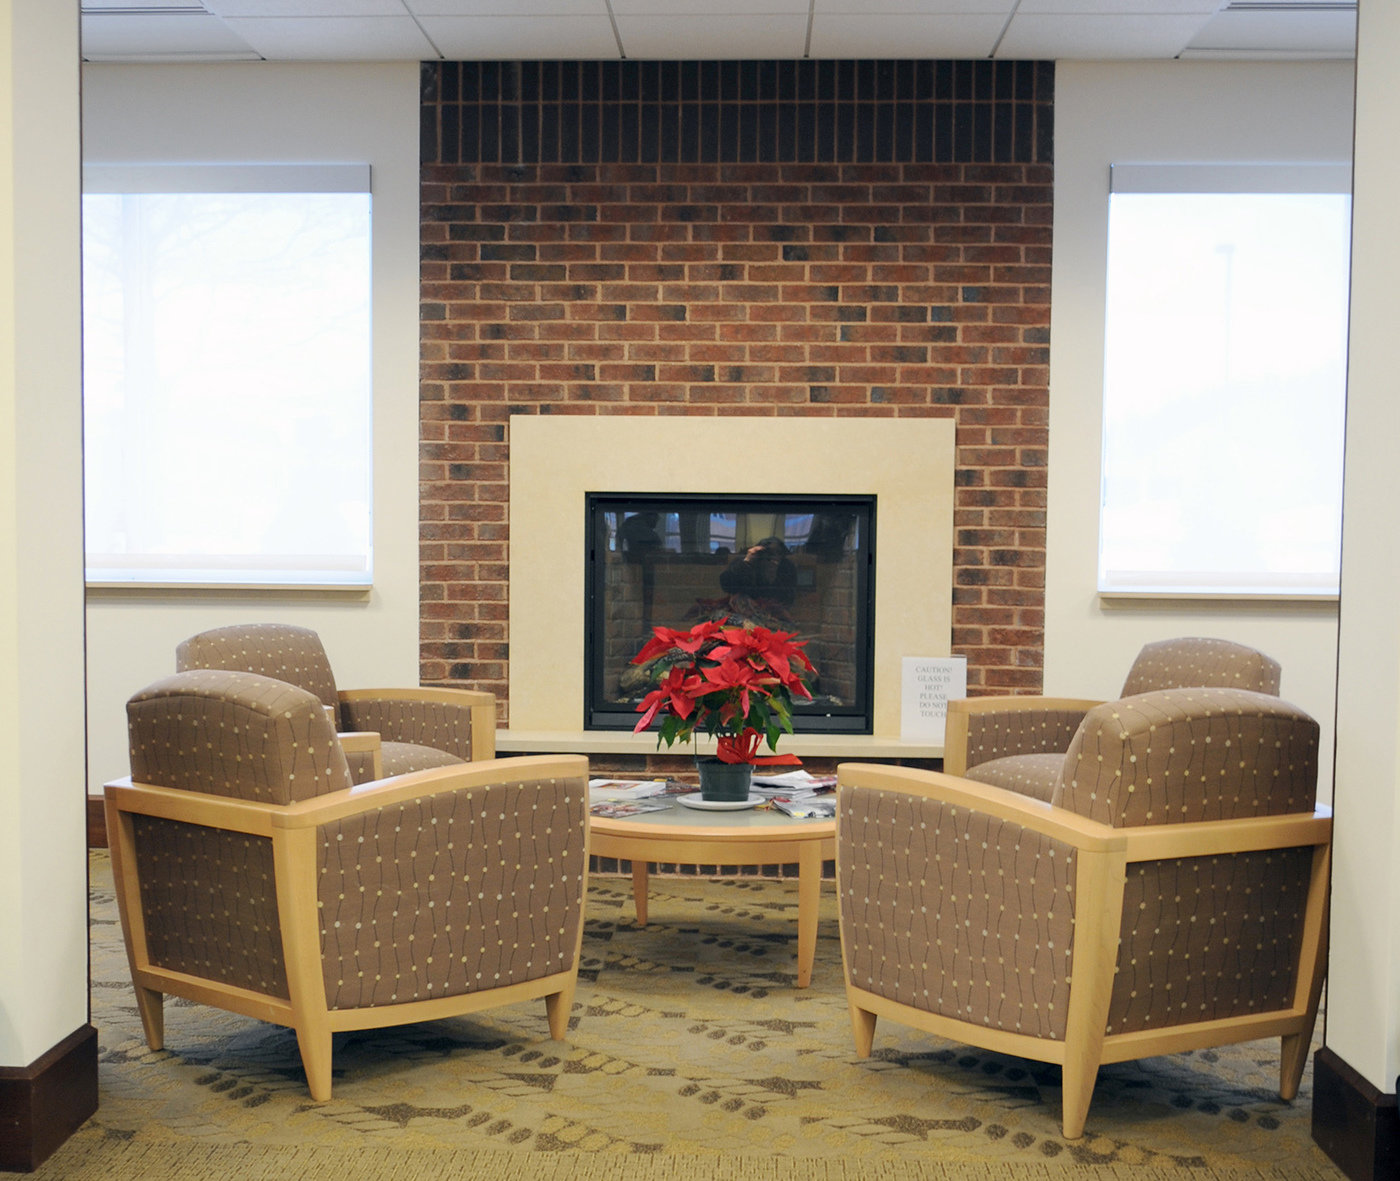 2 tskp somers public library conneticut interior fireplace fireside seating 1400 12x324x1613x1361 q85